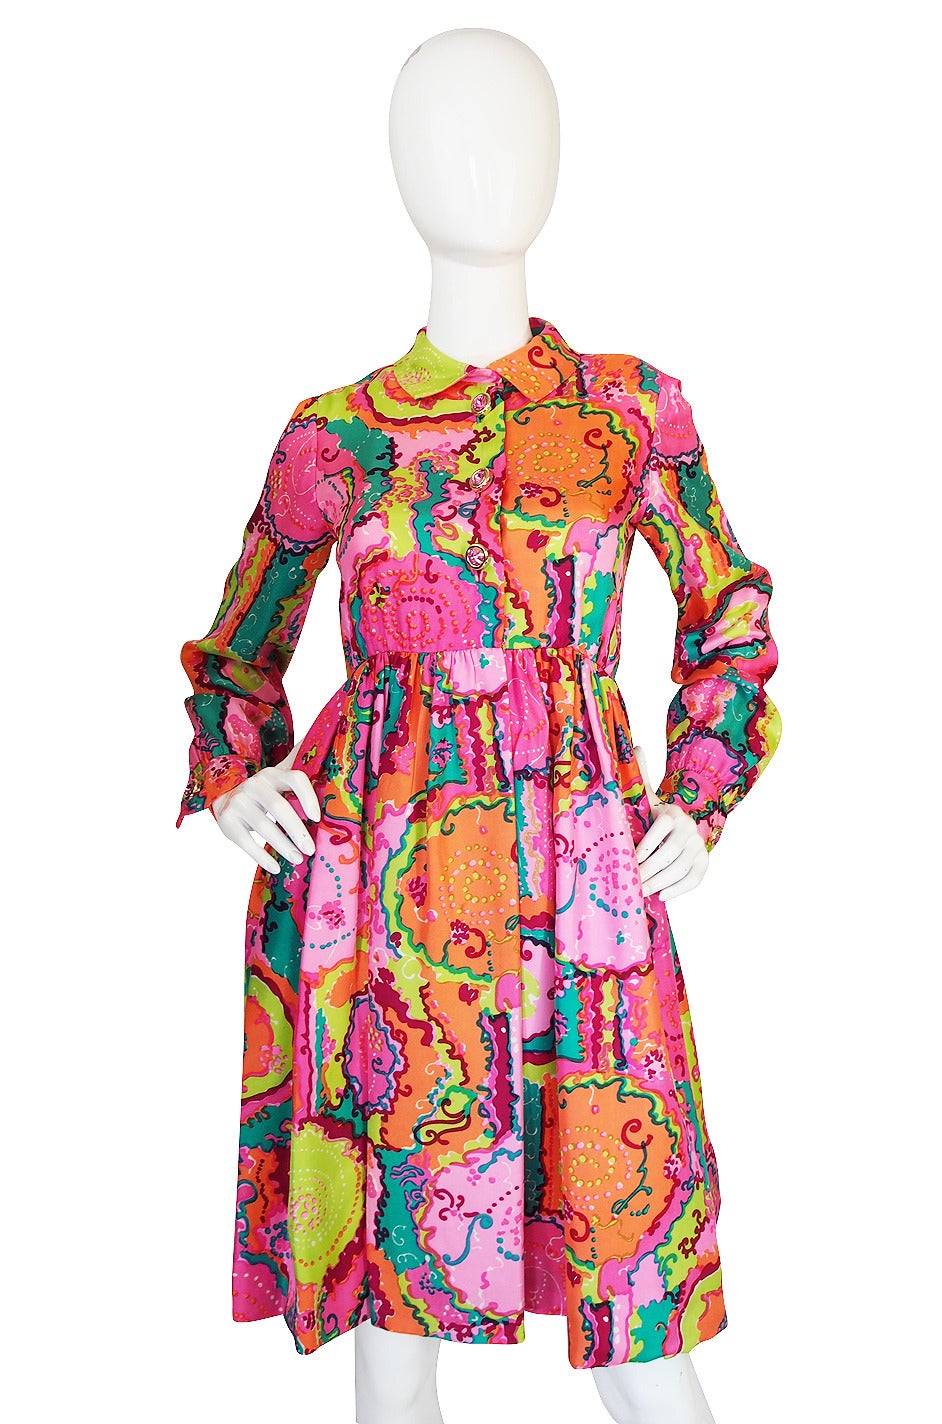 1960s Bright Print Malcolm Starr Silk Twill Dress In Excellent Condition For Sale In Rockwood, ON